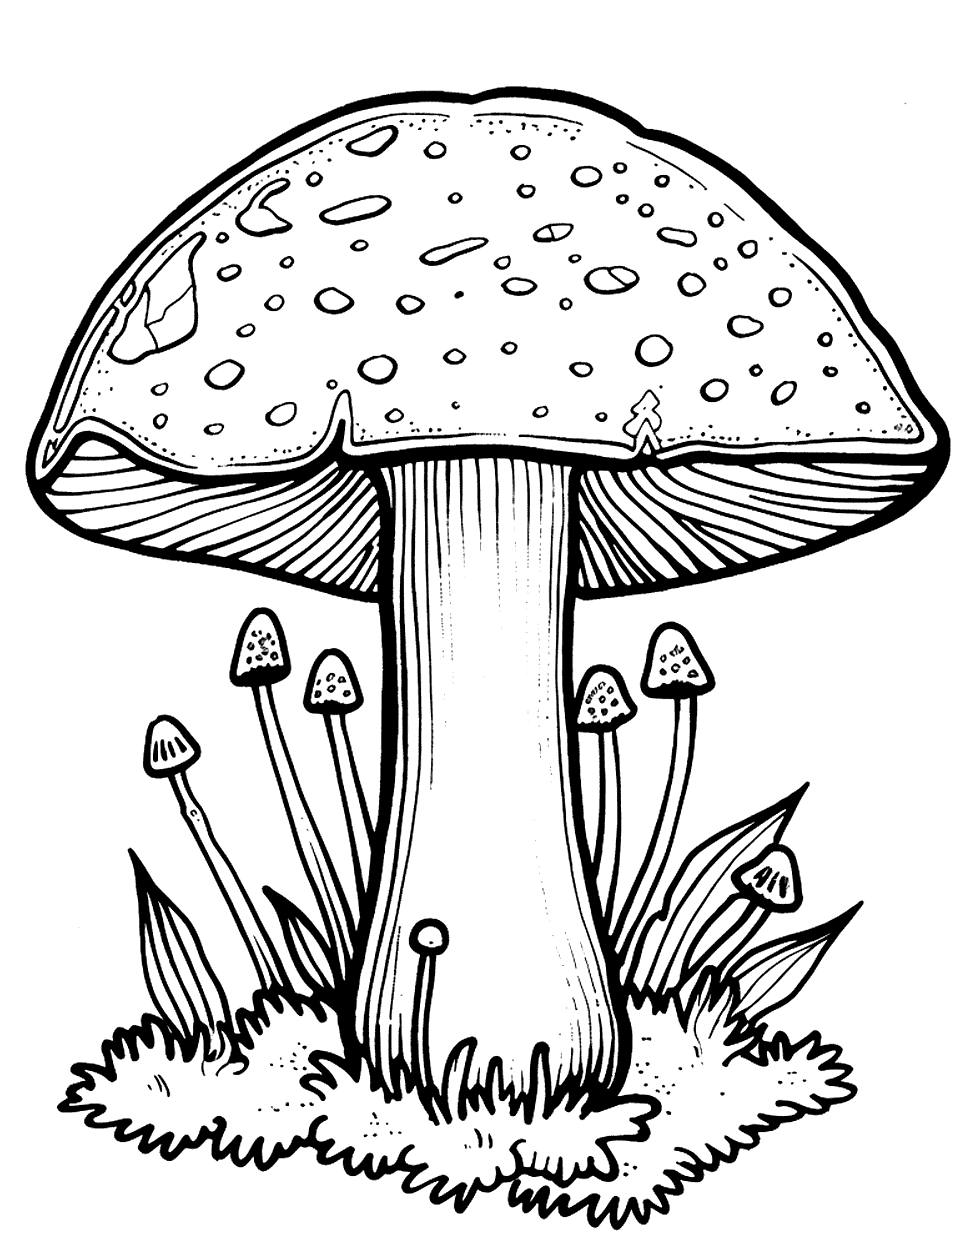 Mushroom and Moss Coloring Page - A mushroom growing in a patch of moss.